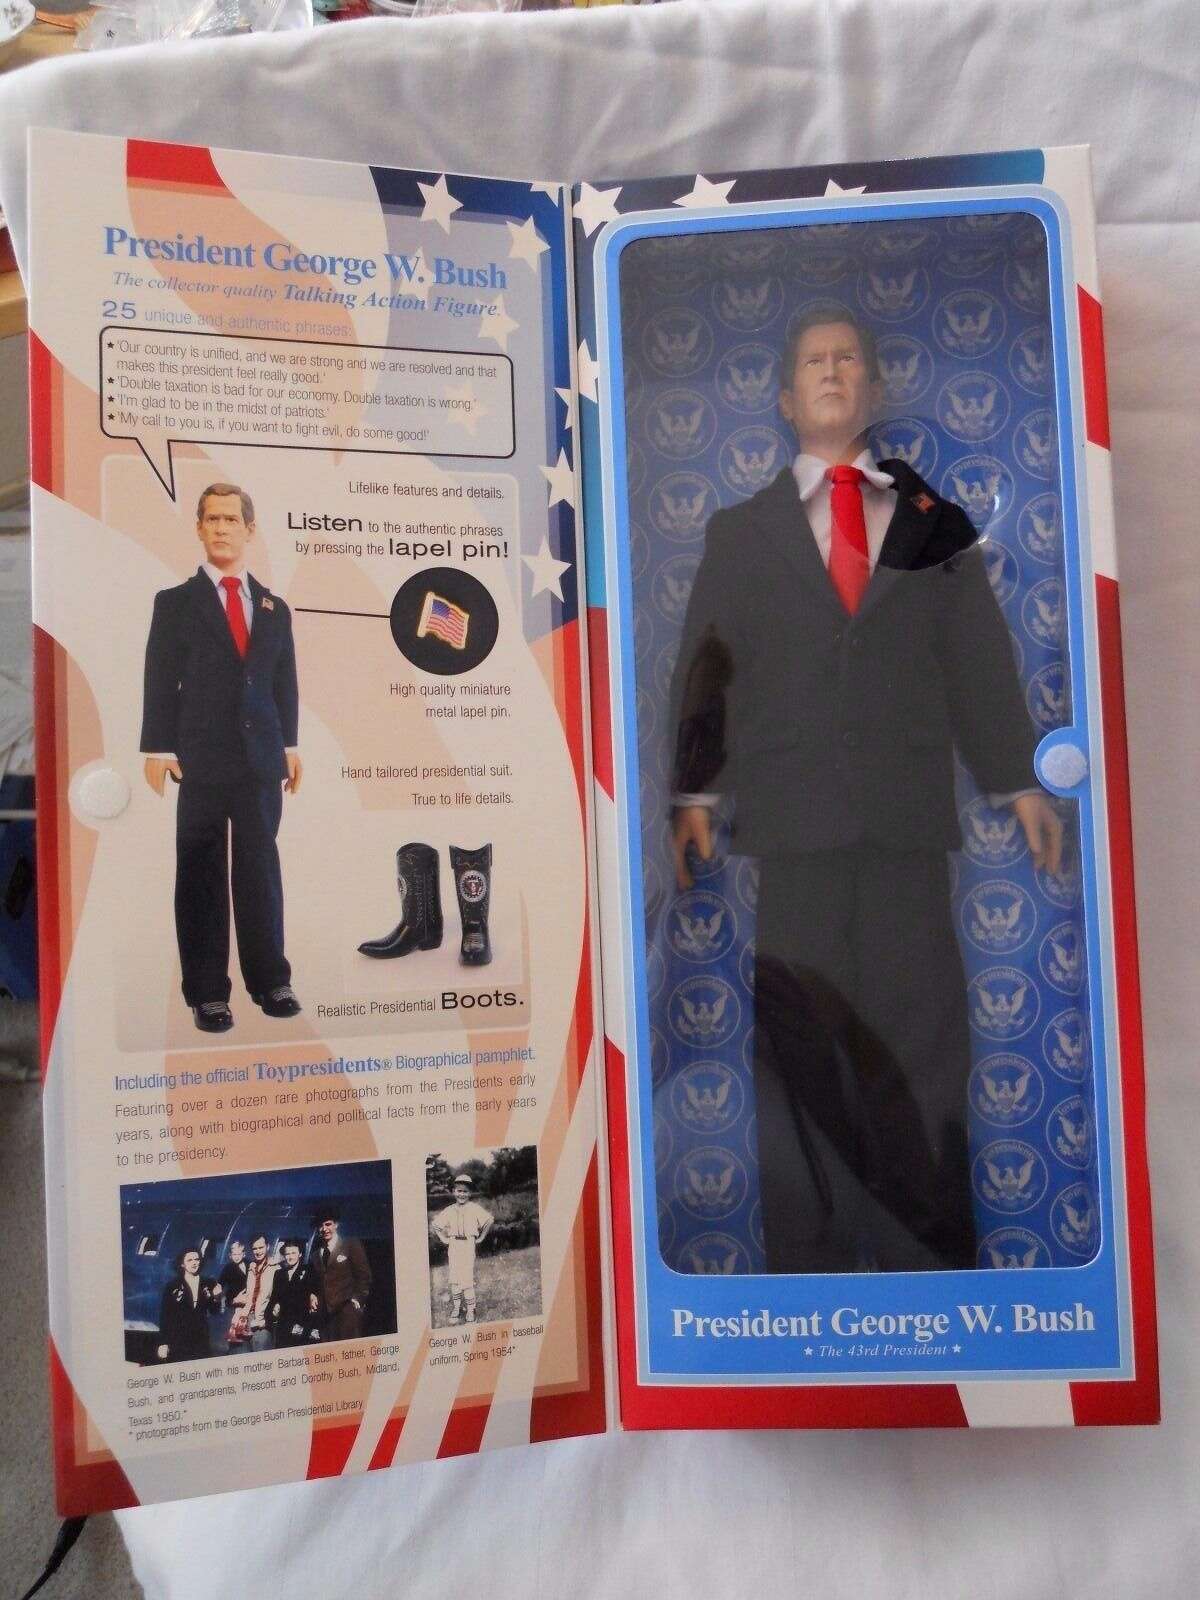 PHOTOS: Former President George W. Bush as portrayed by toys You can celebrate the birth of the 43rd President of the United States by purchasing one of several dolls featuring his likeness on eBay. Of course, some dolls are more flattering than others. Click through to see more versions of the Dubya in toy form...